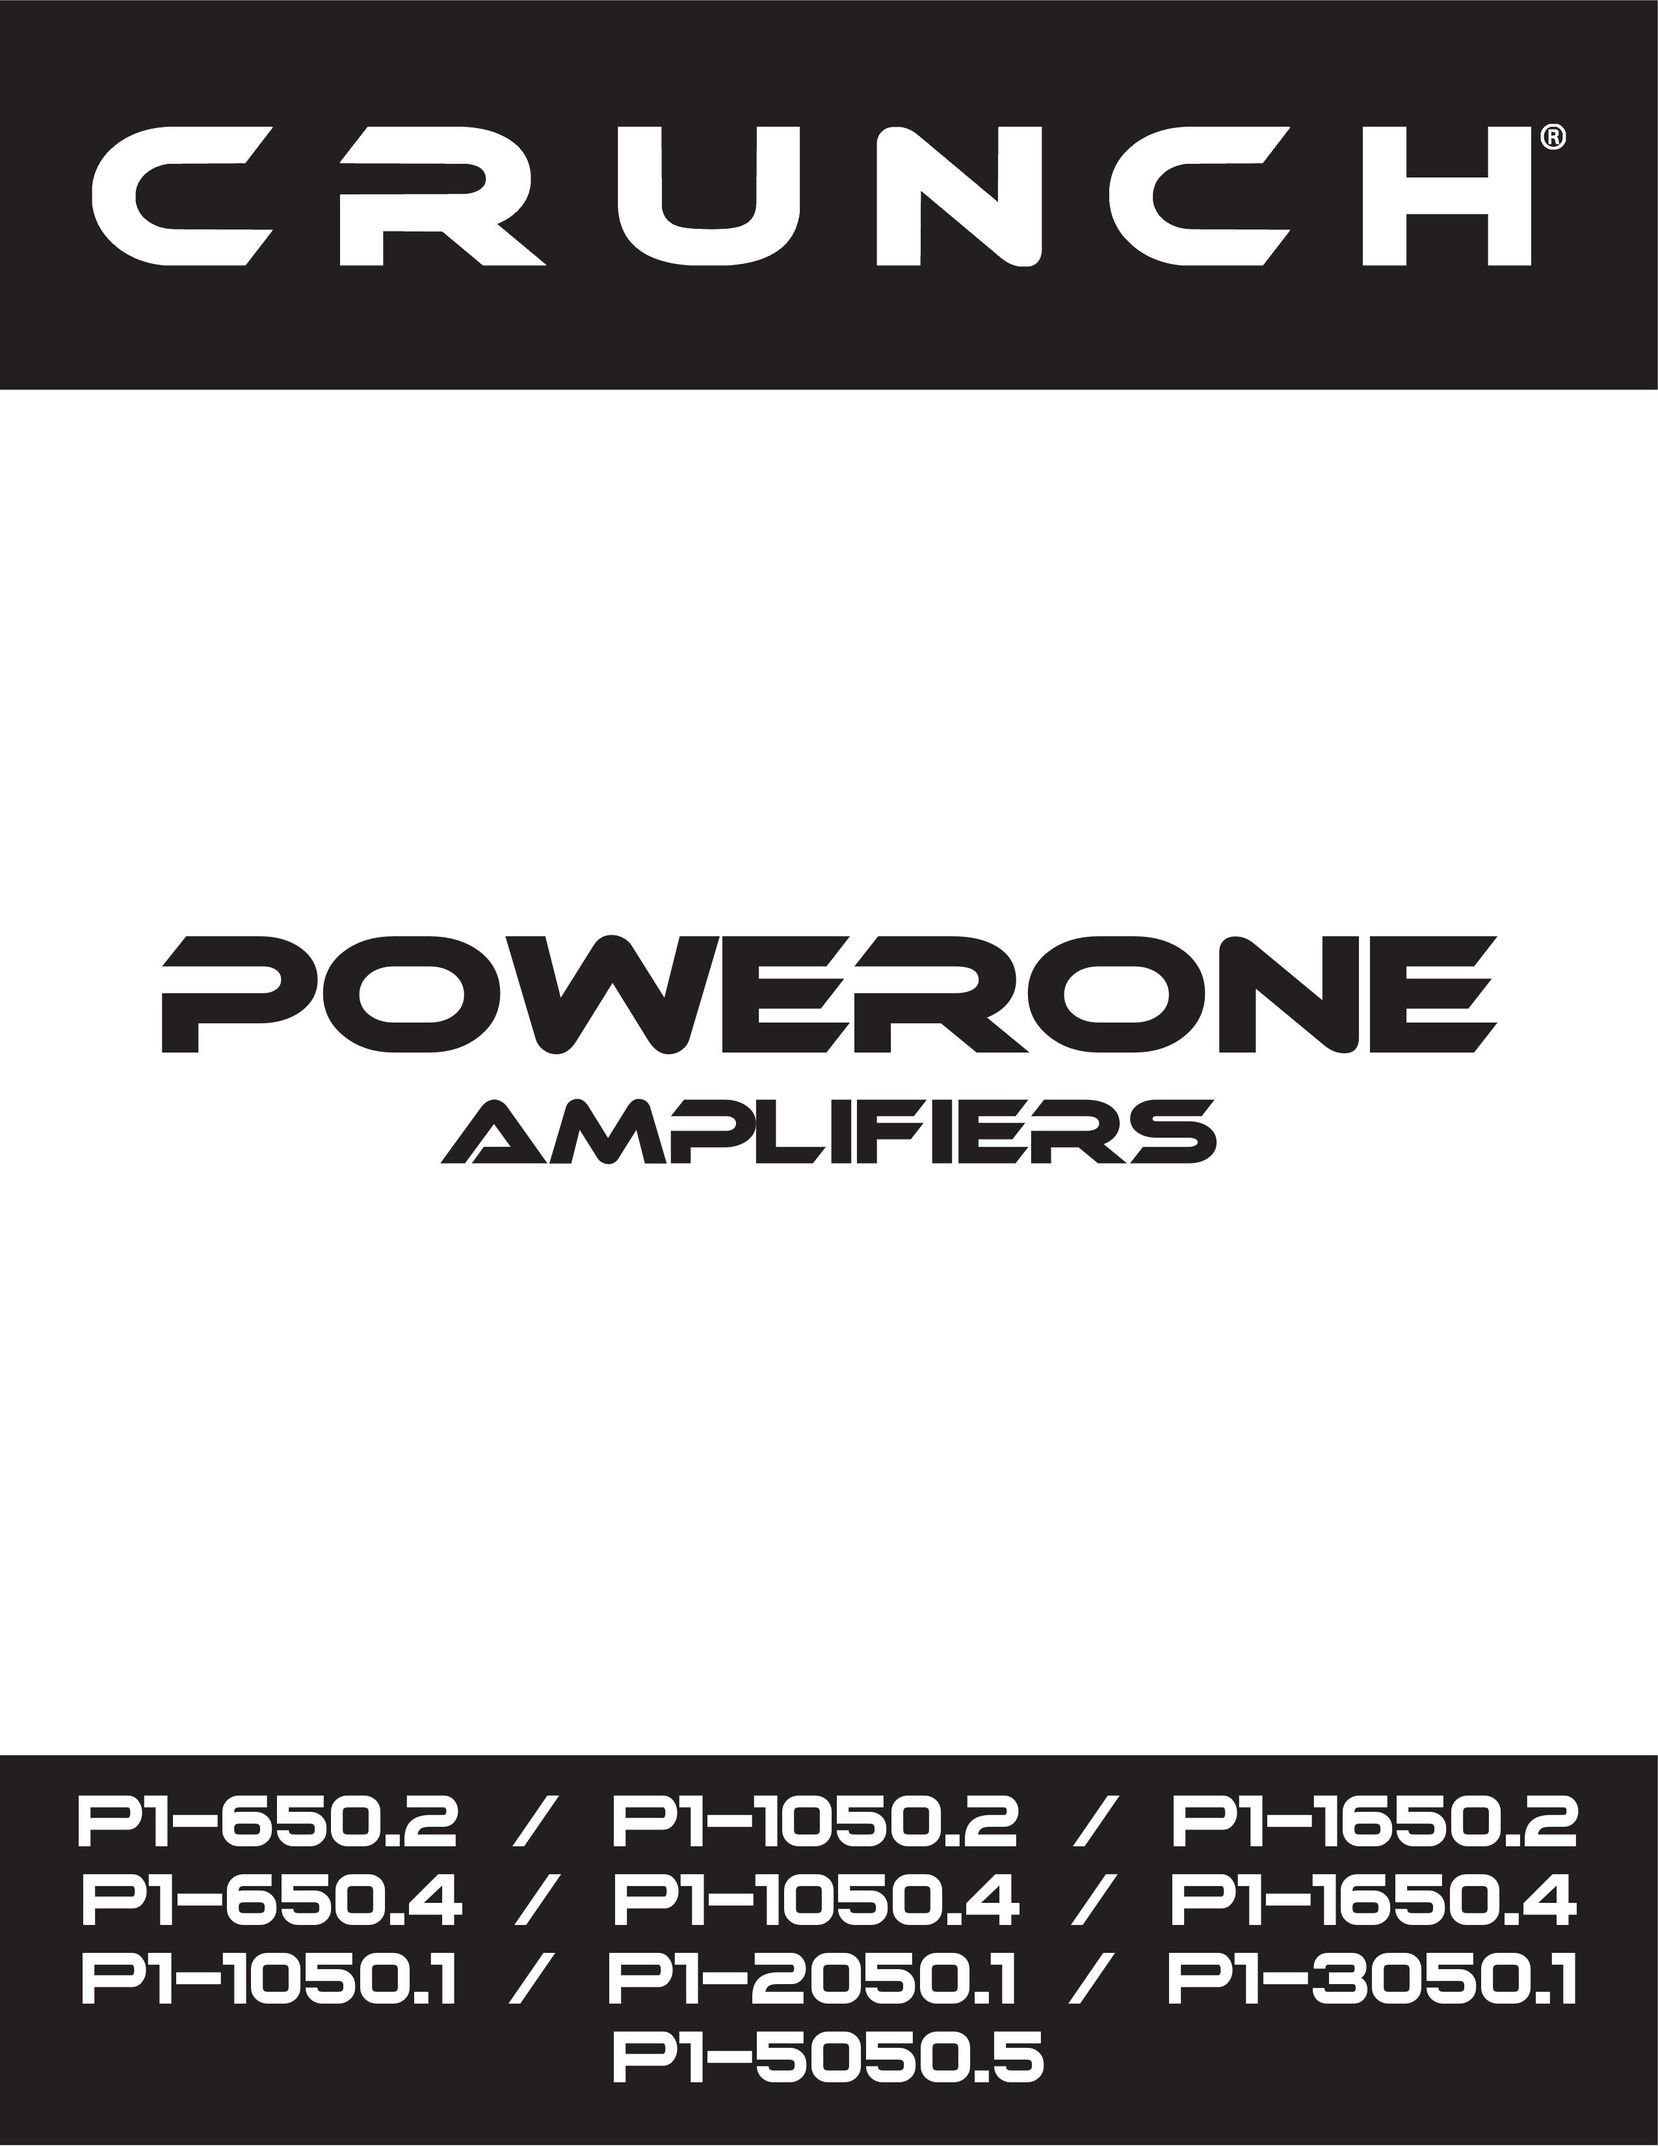 Crunch P1-1050.2 Stereo Amplifier User Manual